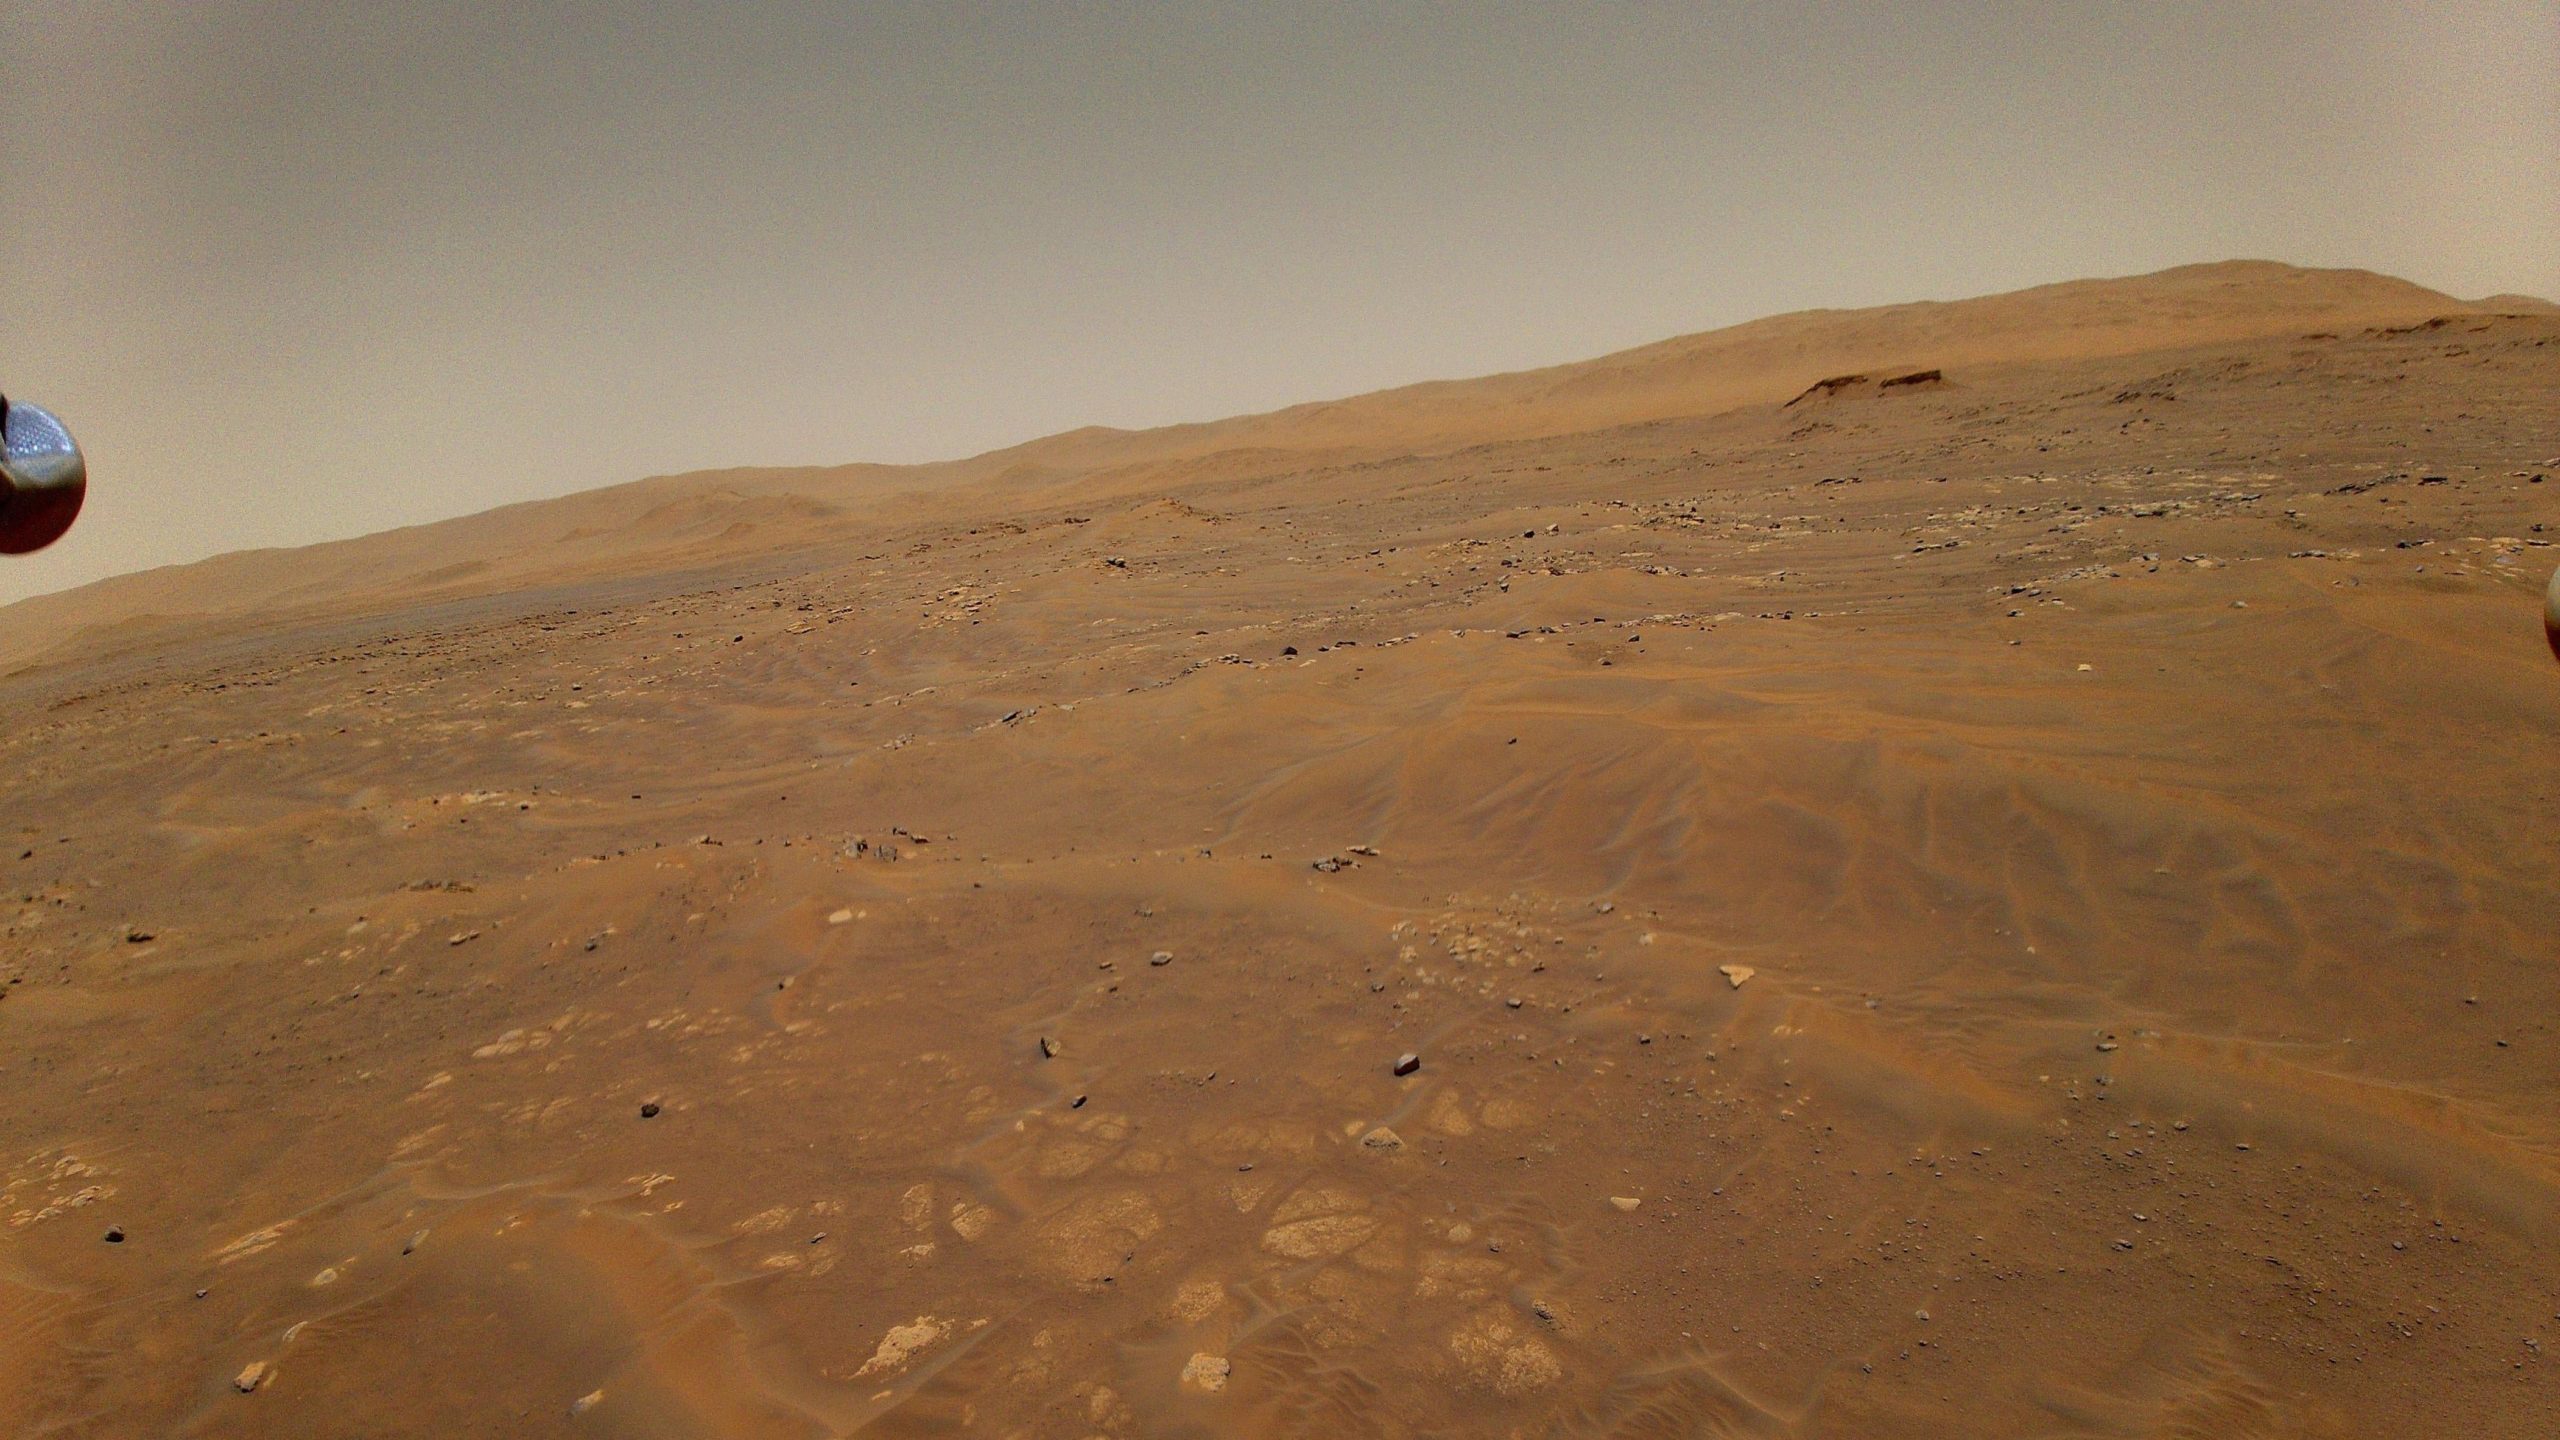 Ingenuity Helicopter Takes an Ambitious Shortcut on Mars in Record-Breaking Ninth Flight